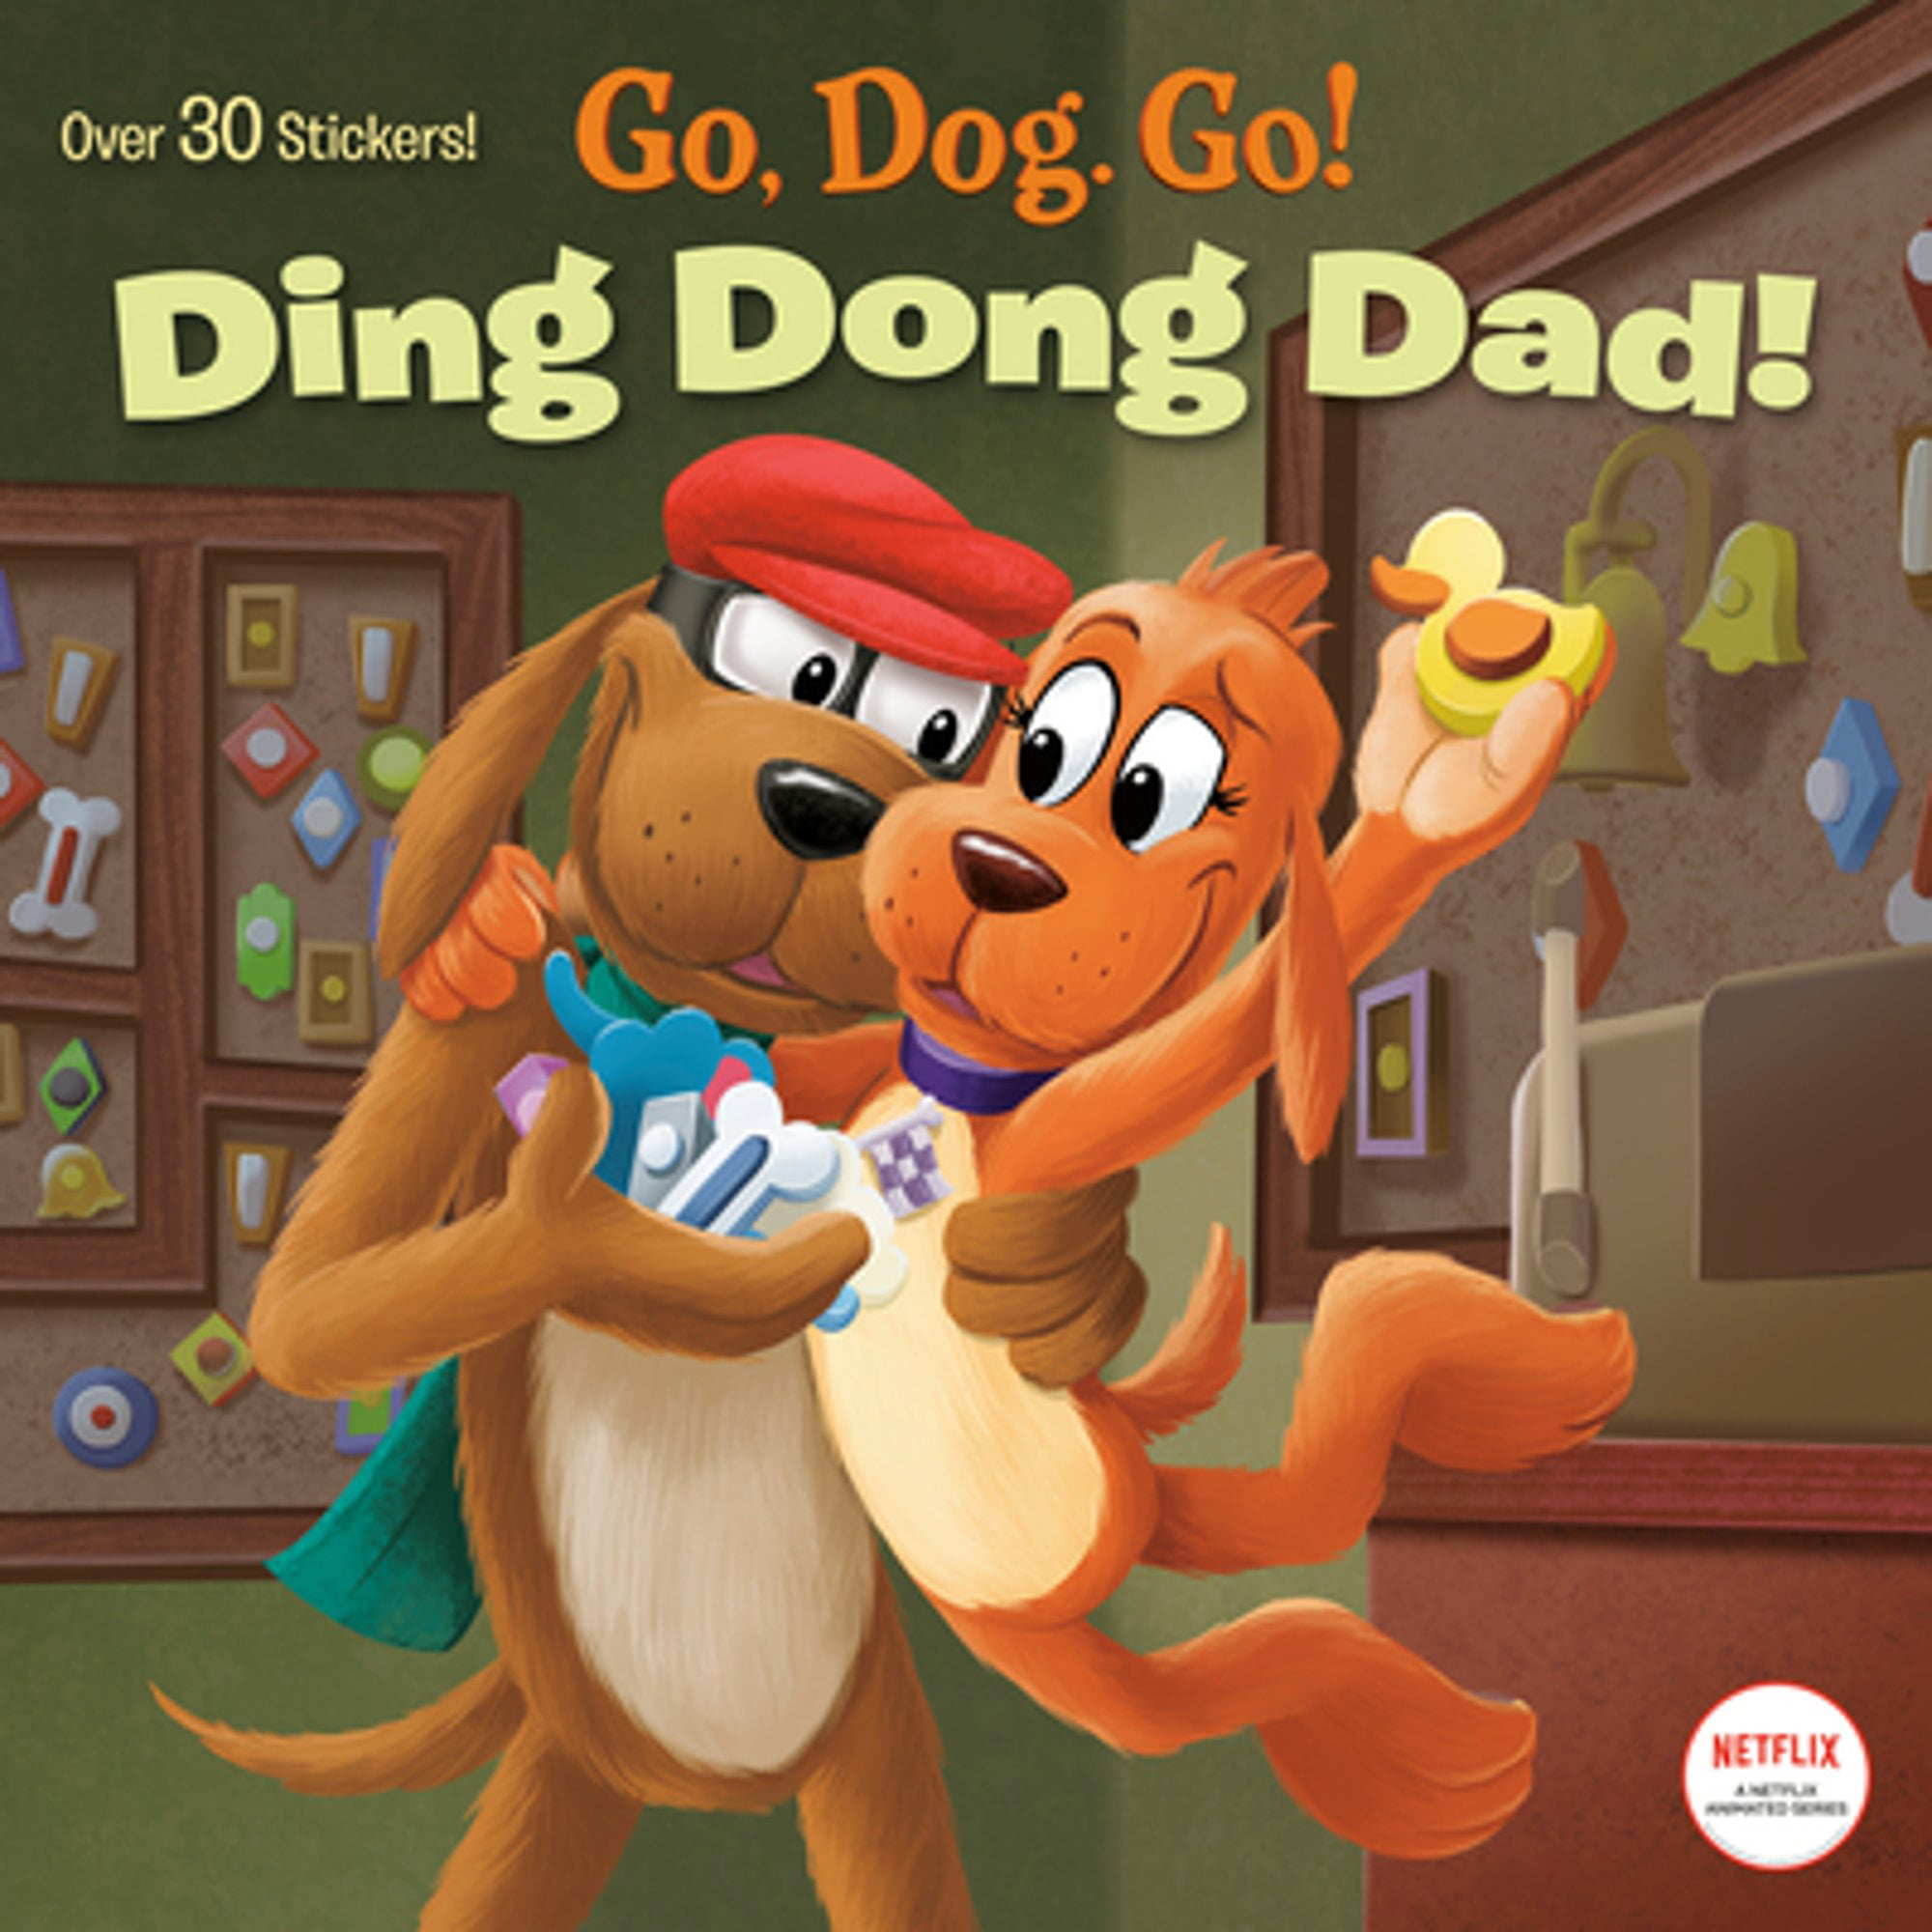 Ding Dong Dad! (Netflix: Go, Dog. Go!) (Pre-Owned Paperback 9780593483831)  by Random House 